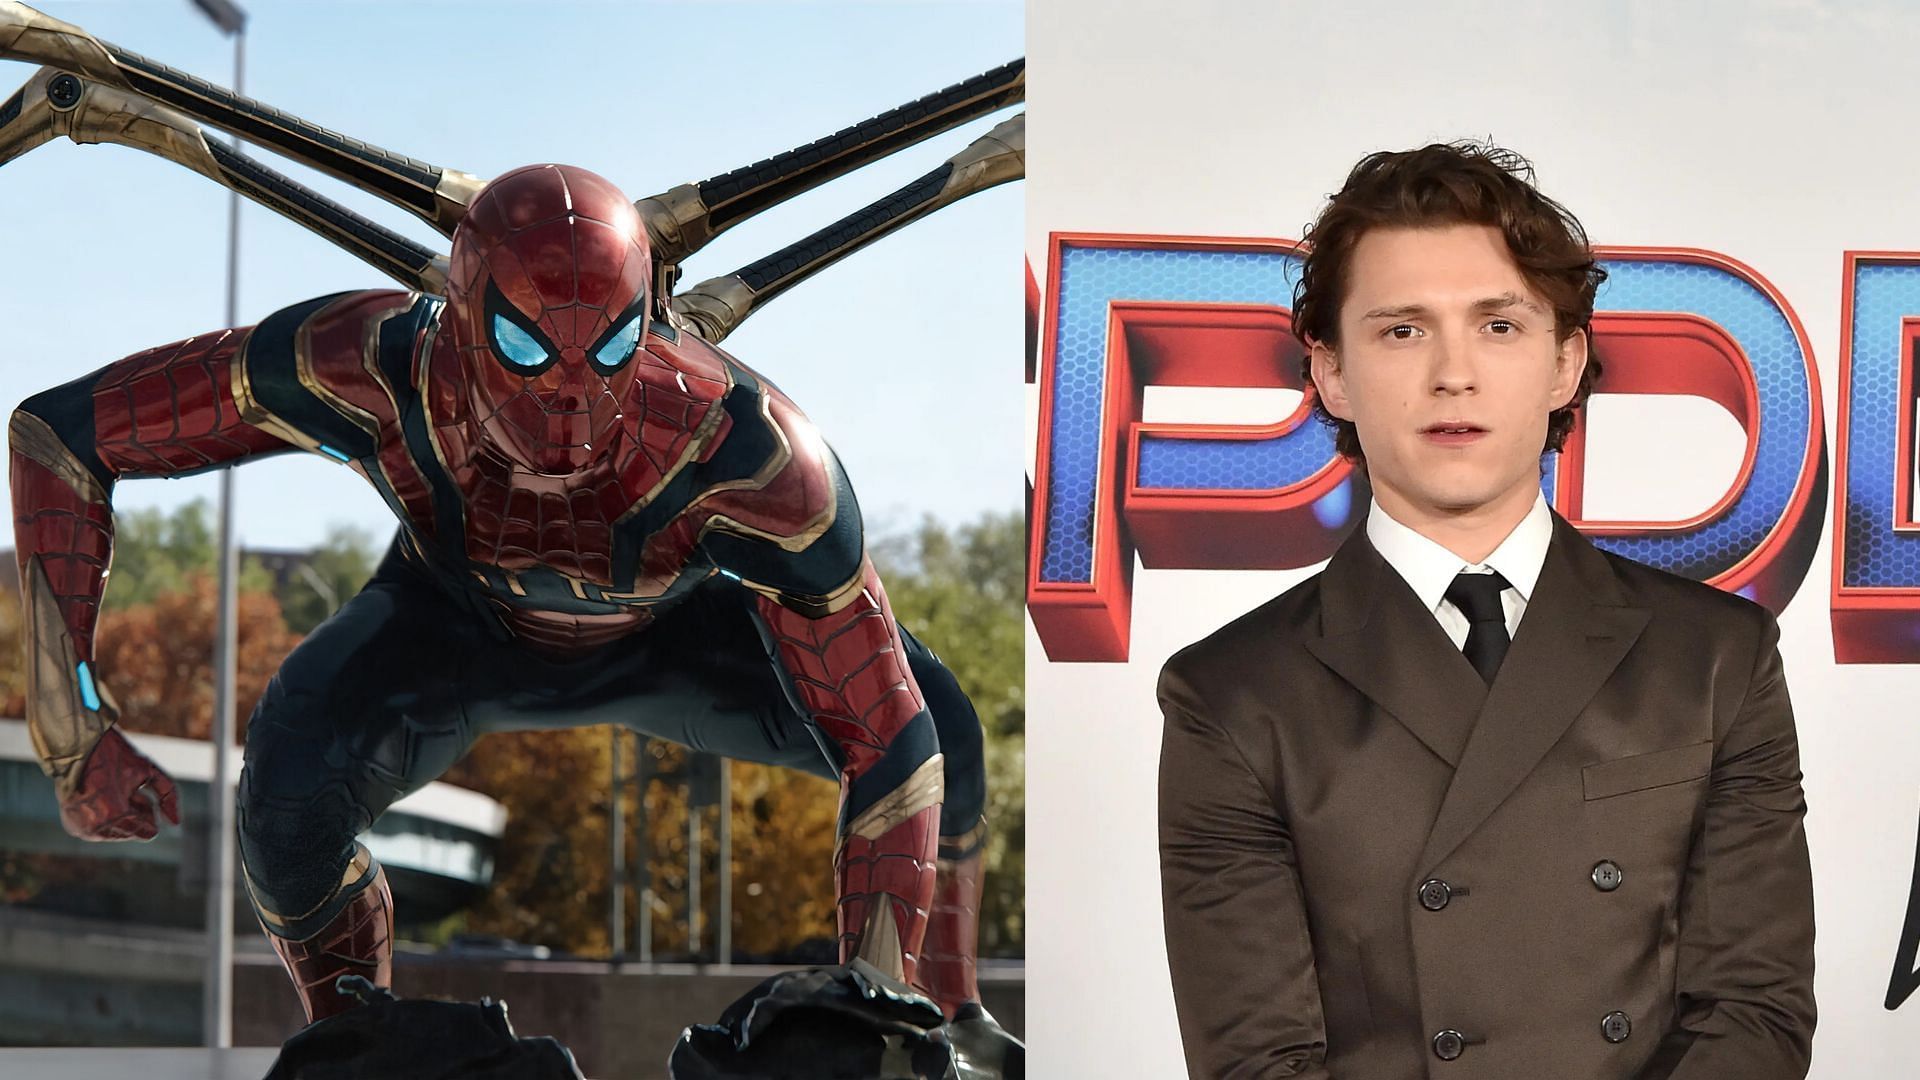 Spider-Man future in doubt after Sony and Marvel fail to reach